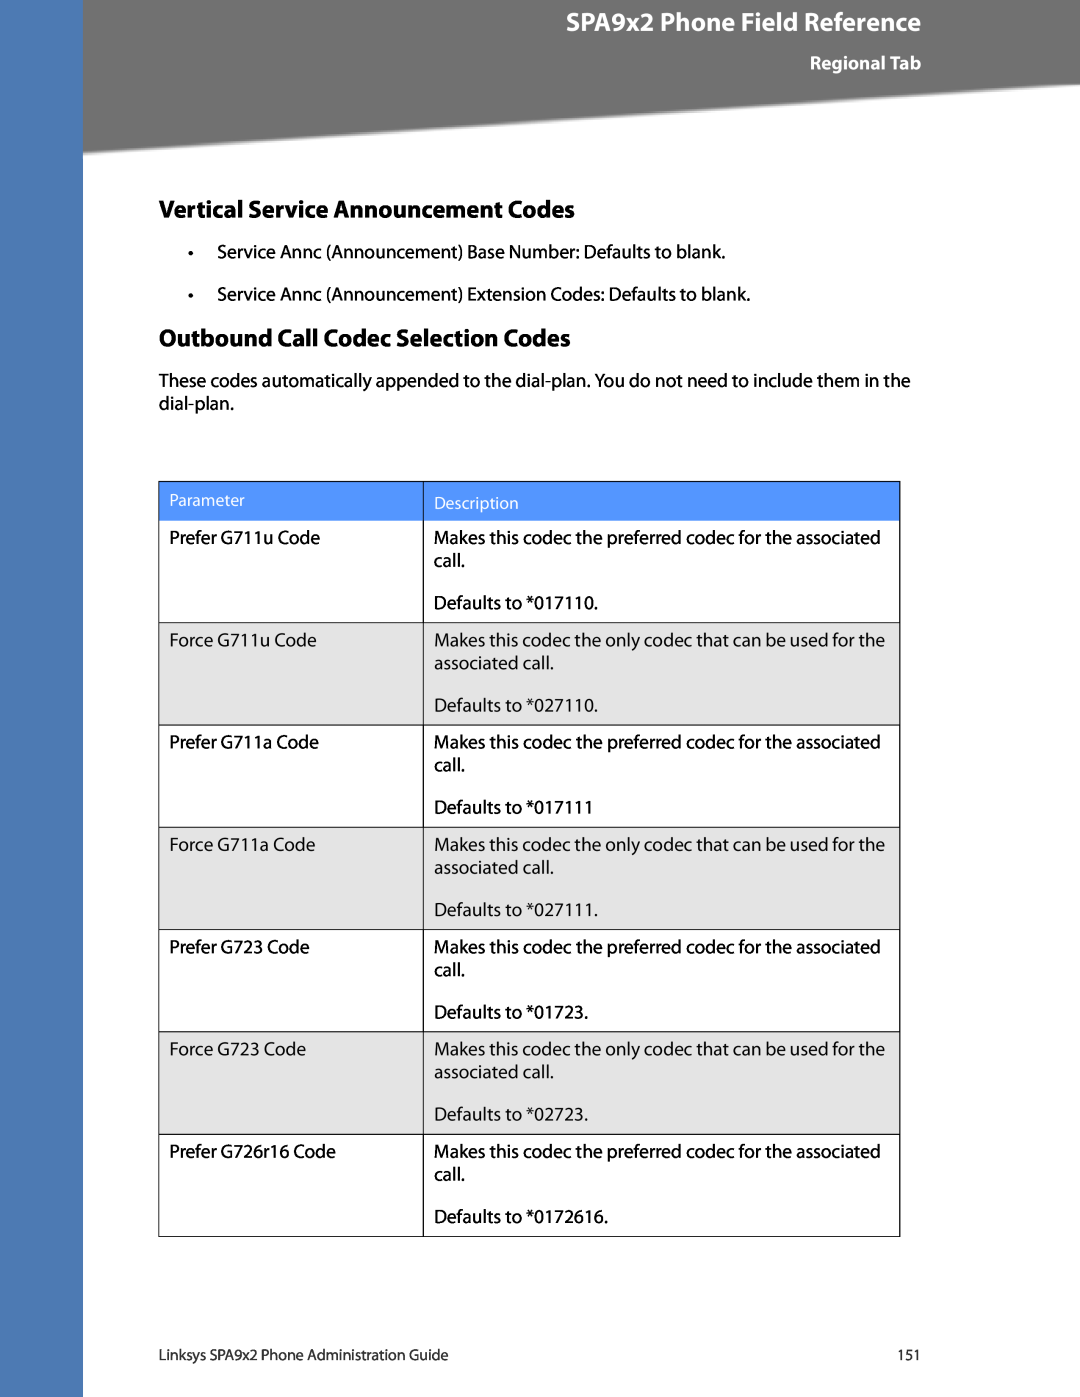 Linksys SPA932 Vertical Service Announcement Codes, SPA9x2 Phone Field Reference, Outbound Call Codec Selection Codes 